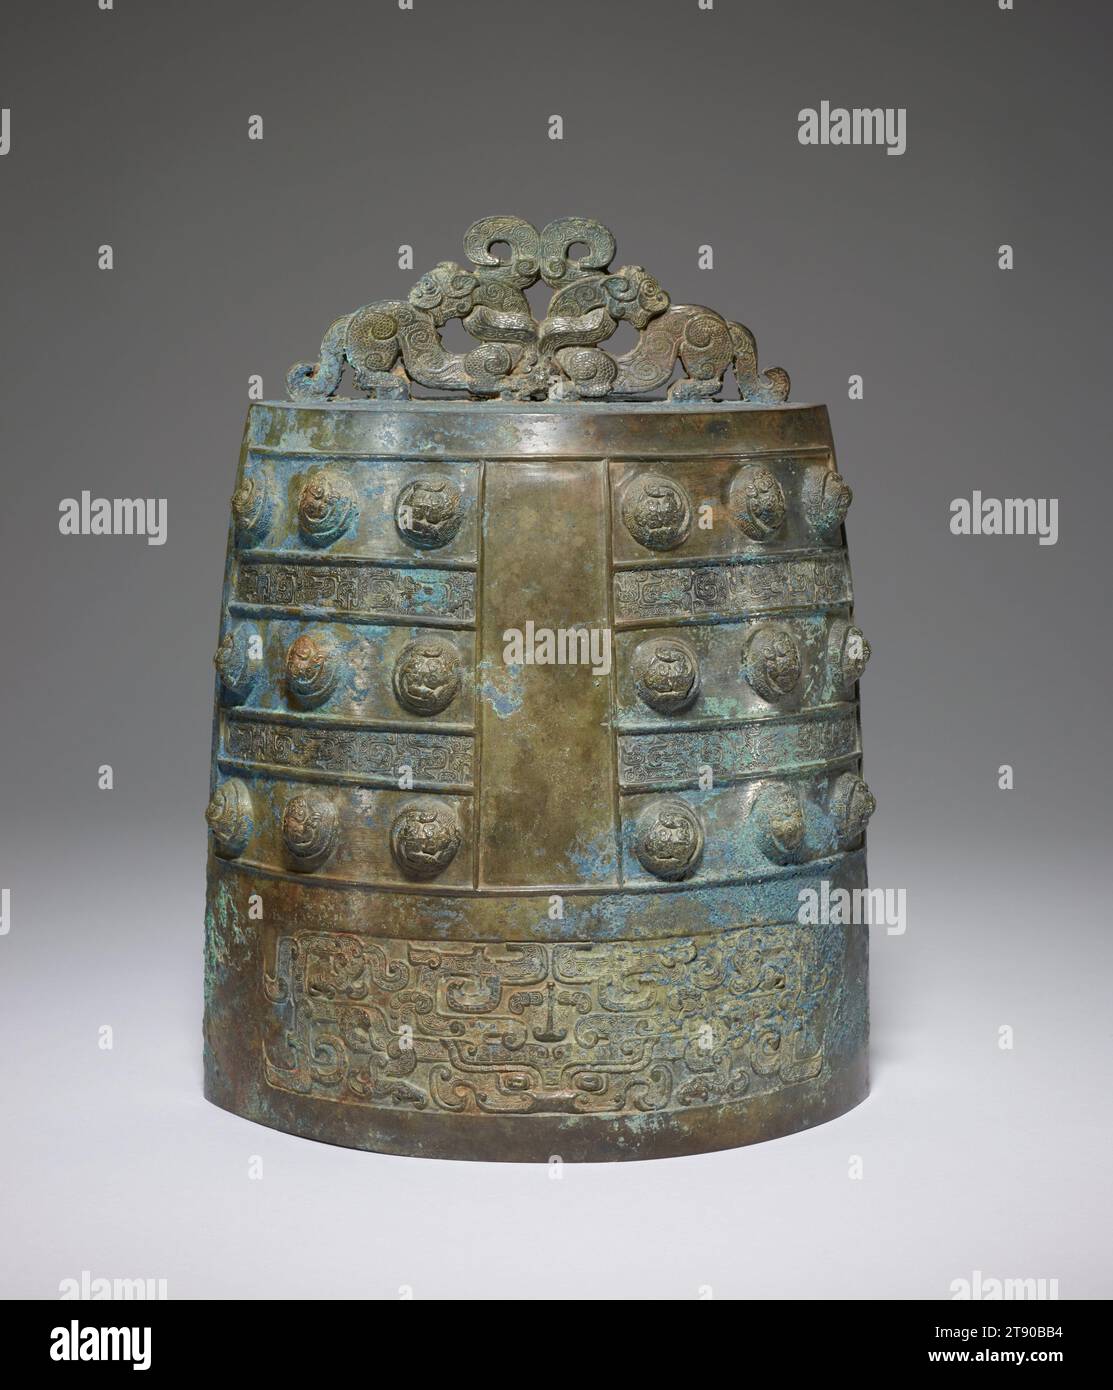 Ritual bell, late 6th-early 5th century BCE, 12 1/2 x 9 1/2 in. (31.75 x 24.13 cm), Bronze, China, 6th-5th century BCE, This richly adorned bell was originally part of a graduated set. It is of the type po-cheng, one of two popular bell shapes encountered in Eastern Chou dynasty burials. Po-cheng bells have a flat bottom, slightly convex sides, a suspension device often in the form of stylized animals, cast on top, and emit a single tone. The second basic type of bell is called yung-cheng. Stock Photo